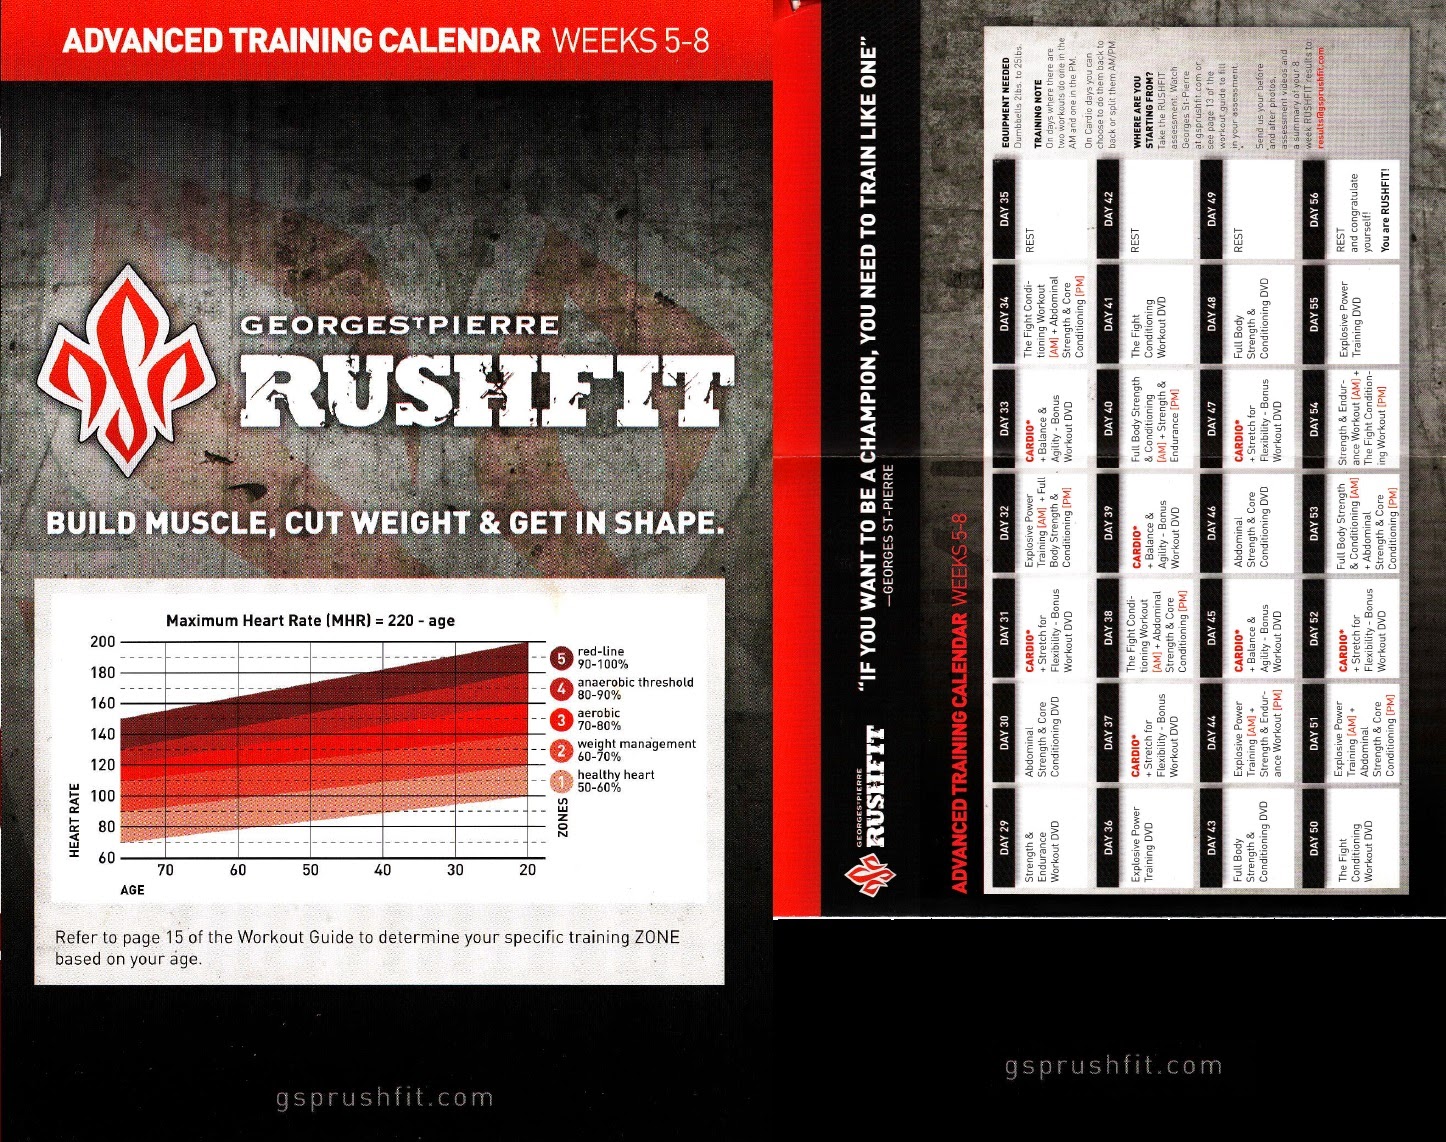 Gsp rushfit workout guide